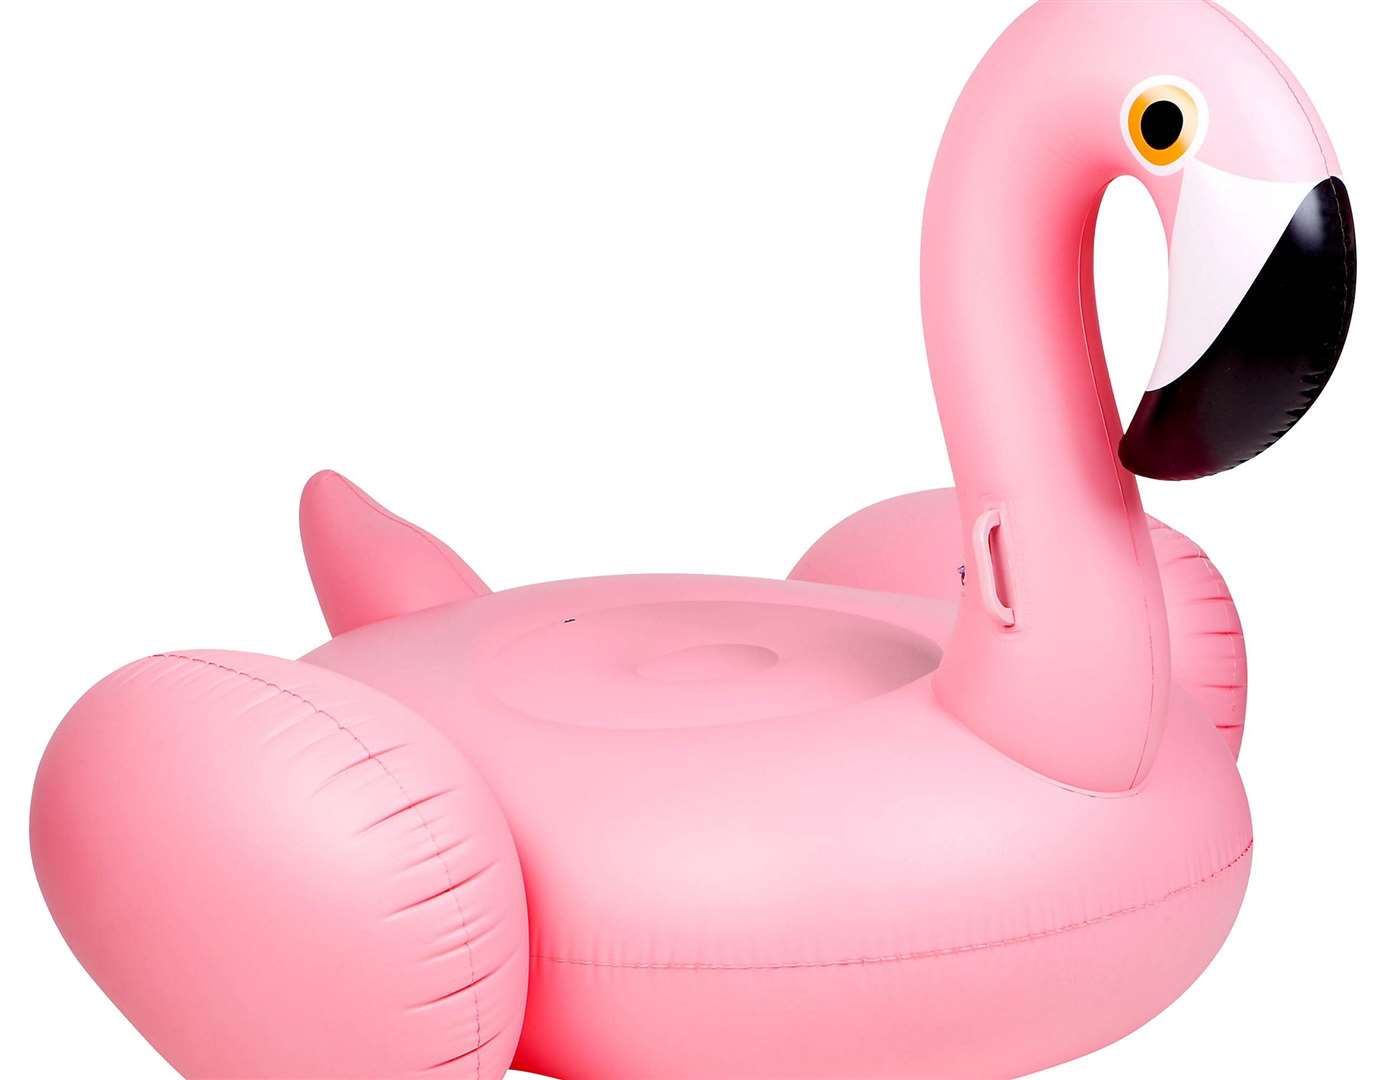 The inflatable pink flamingo has become a popular trend of the last 10 years says John Lewis